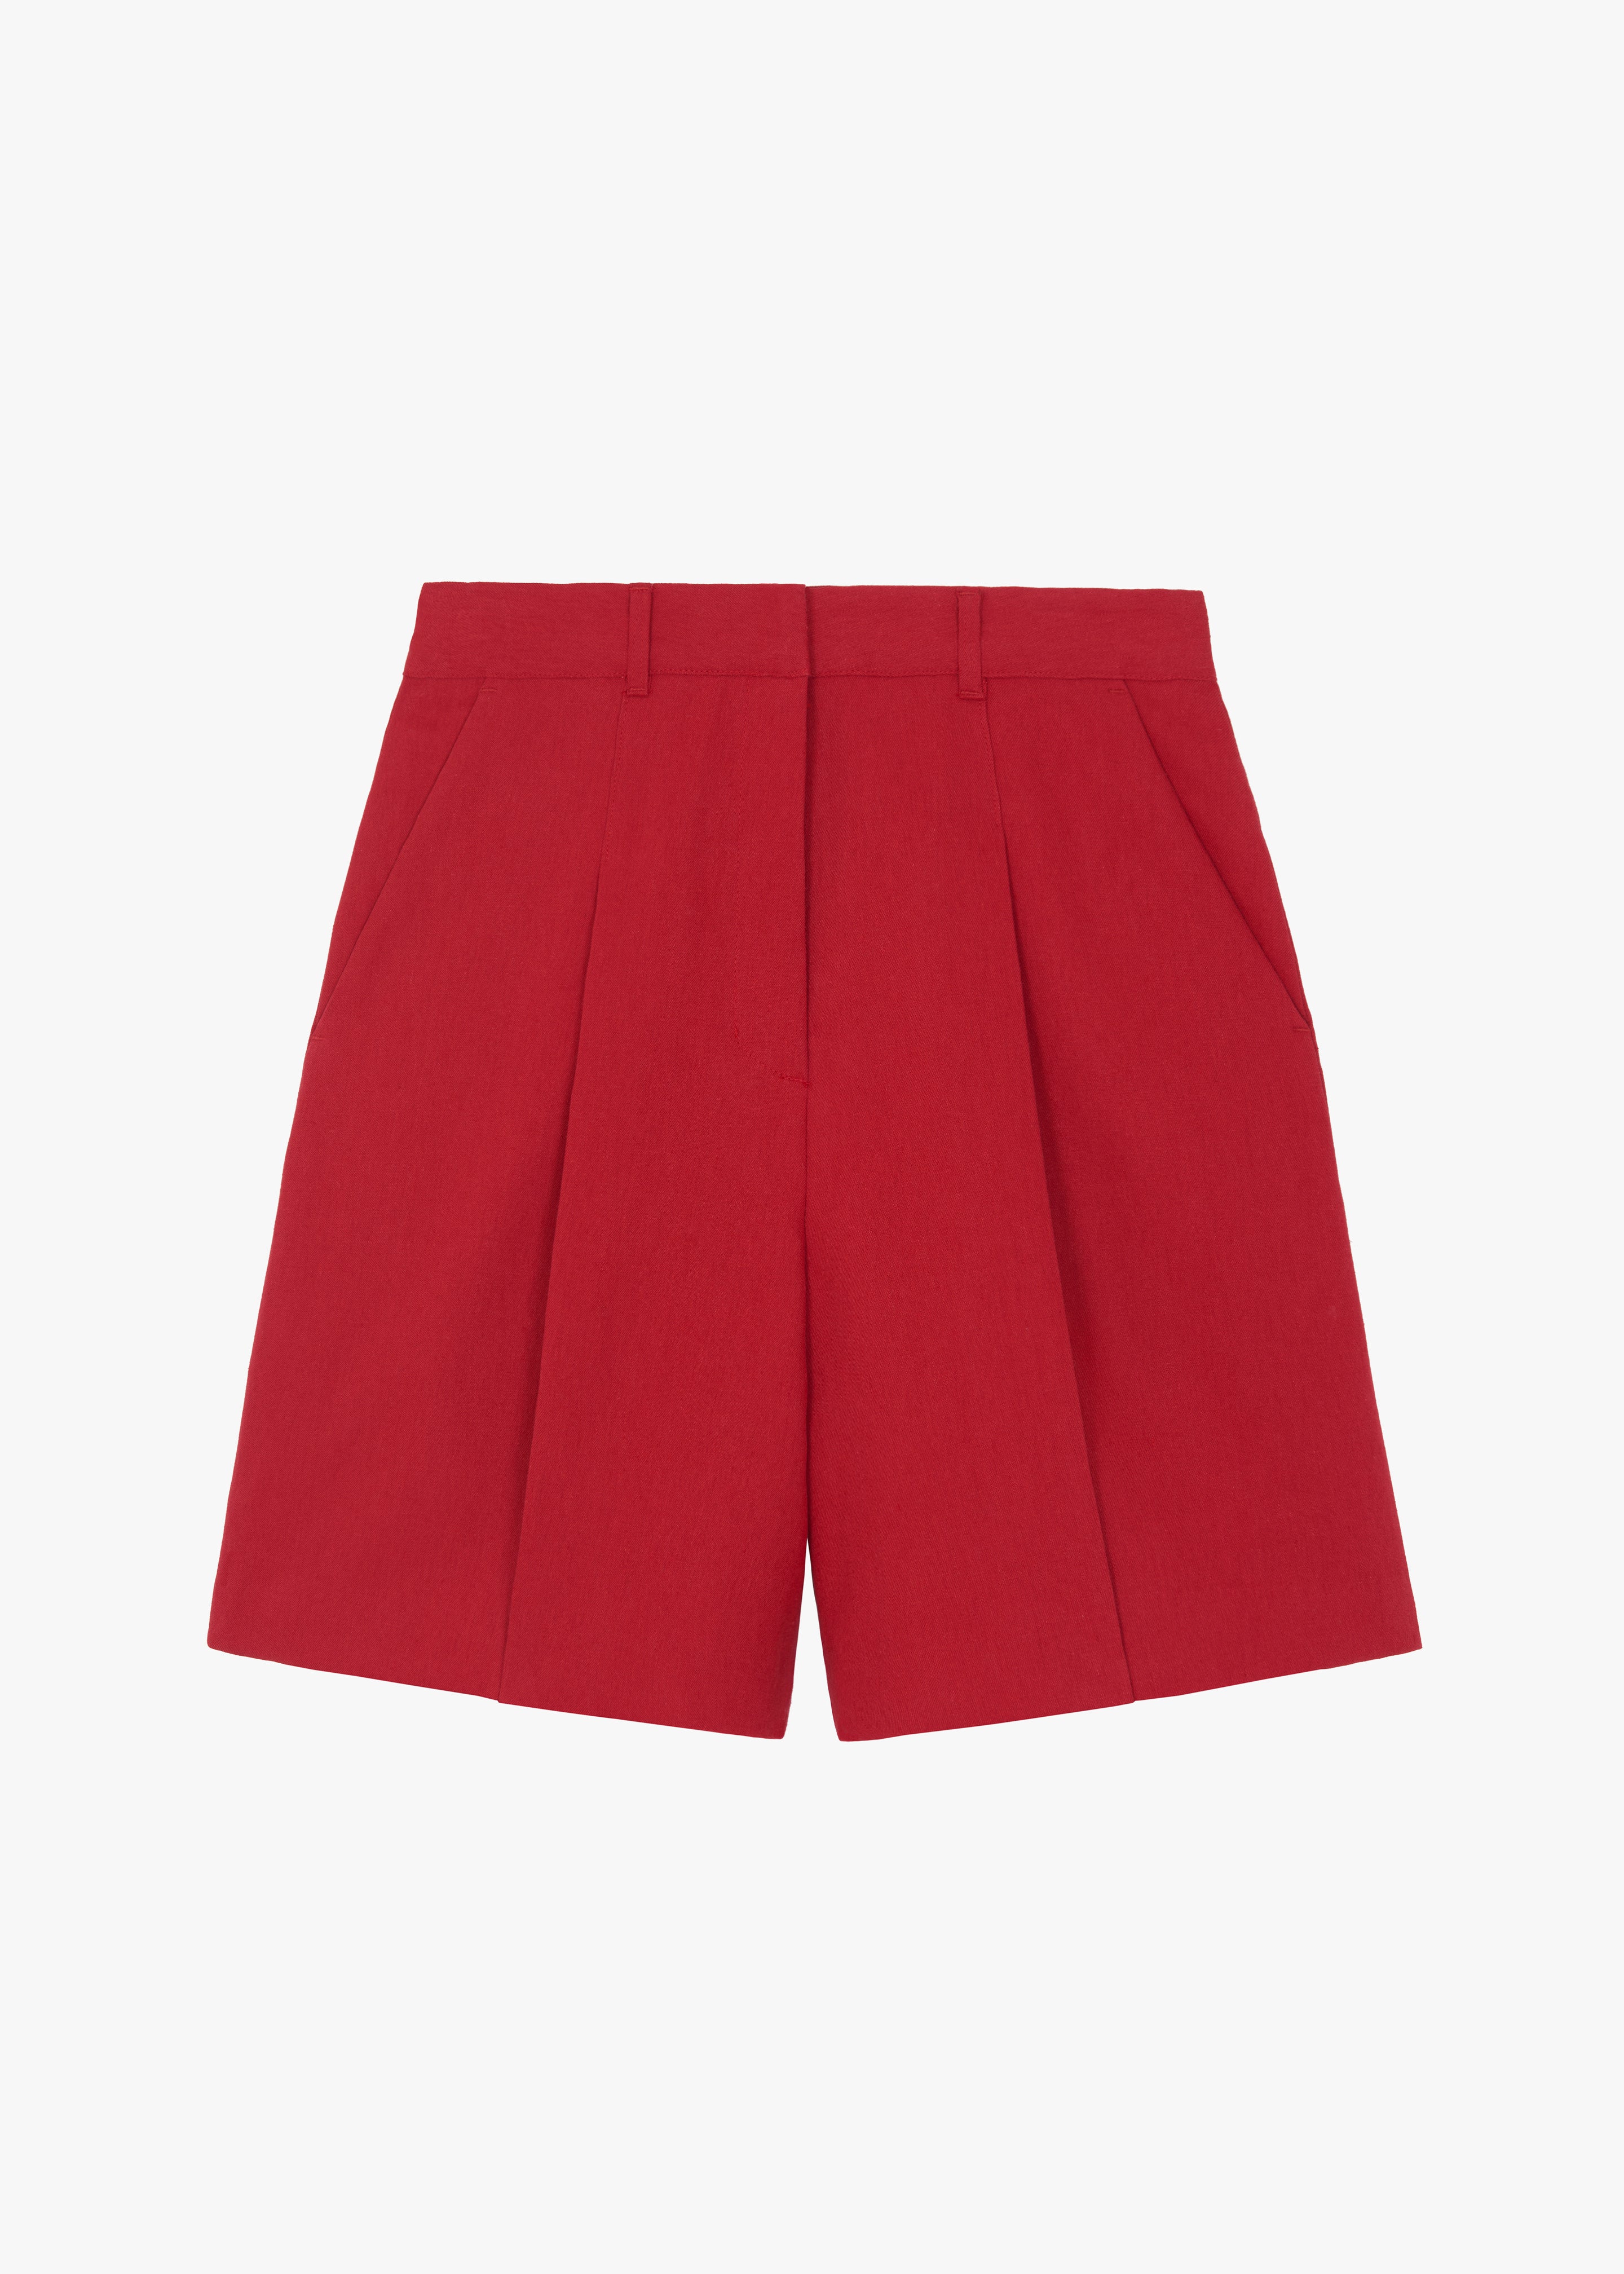 Angie Shorts - Red - 9